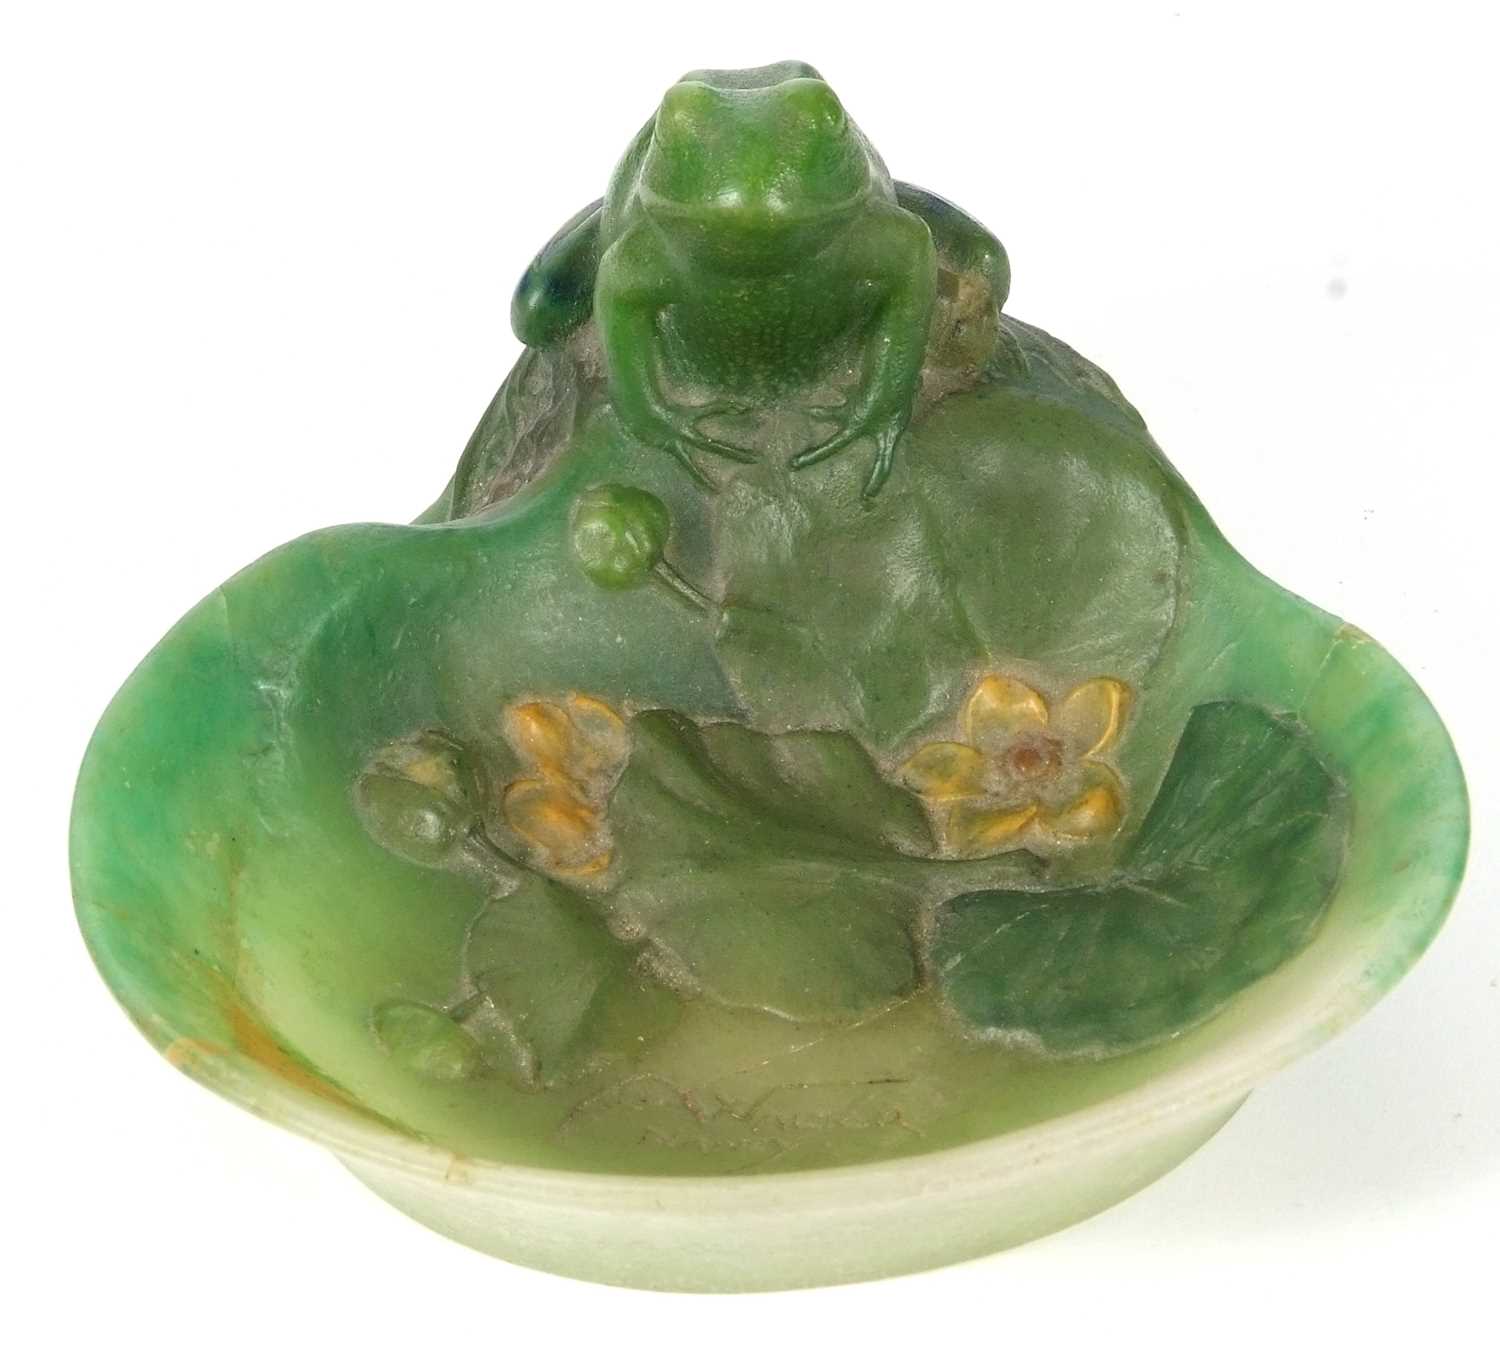 An Almeric Walter pate de verre dish c1920 designed by Henri Berge modelled as a green coloured frog - Image 8 of 11